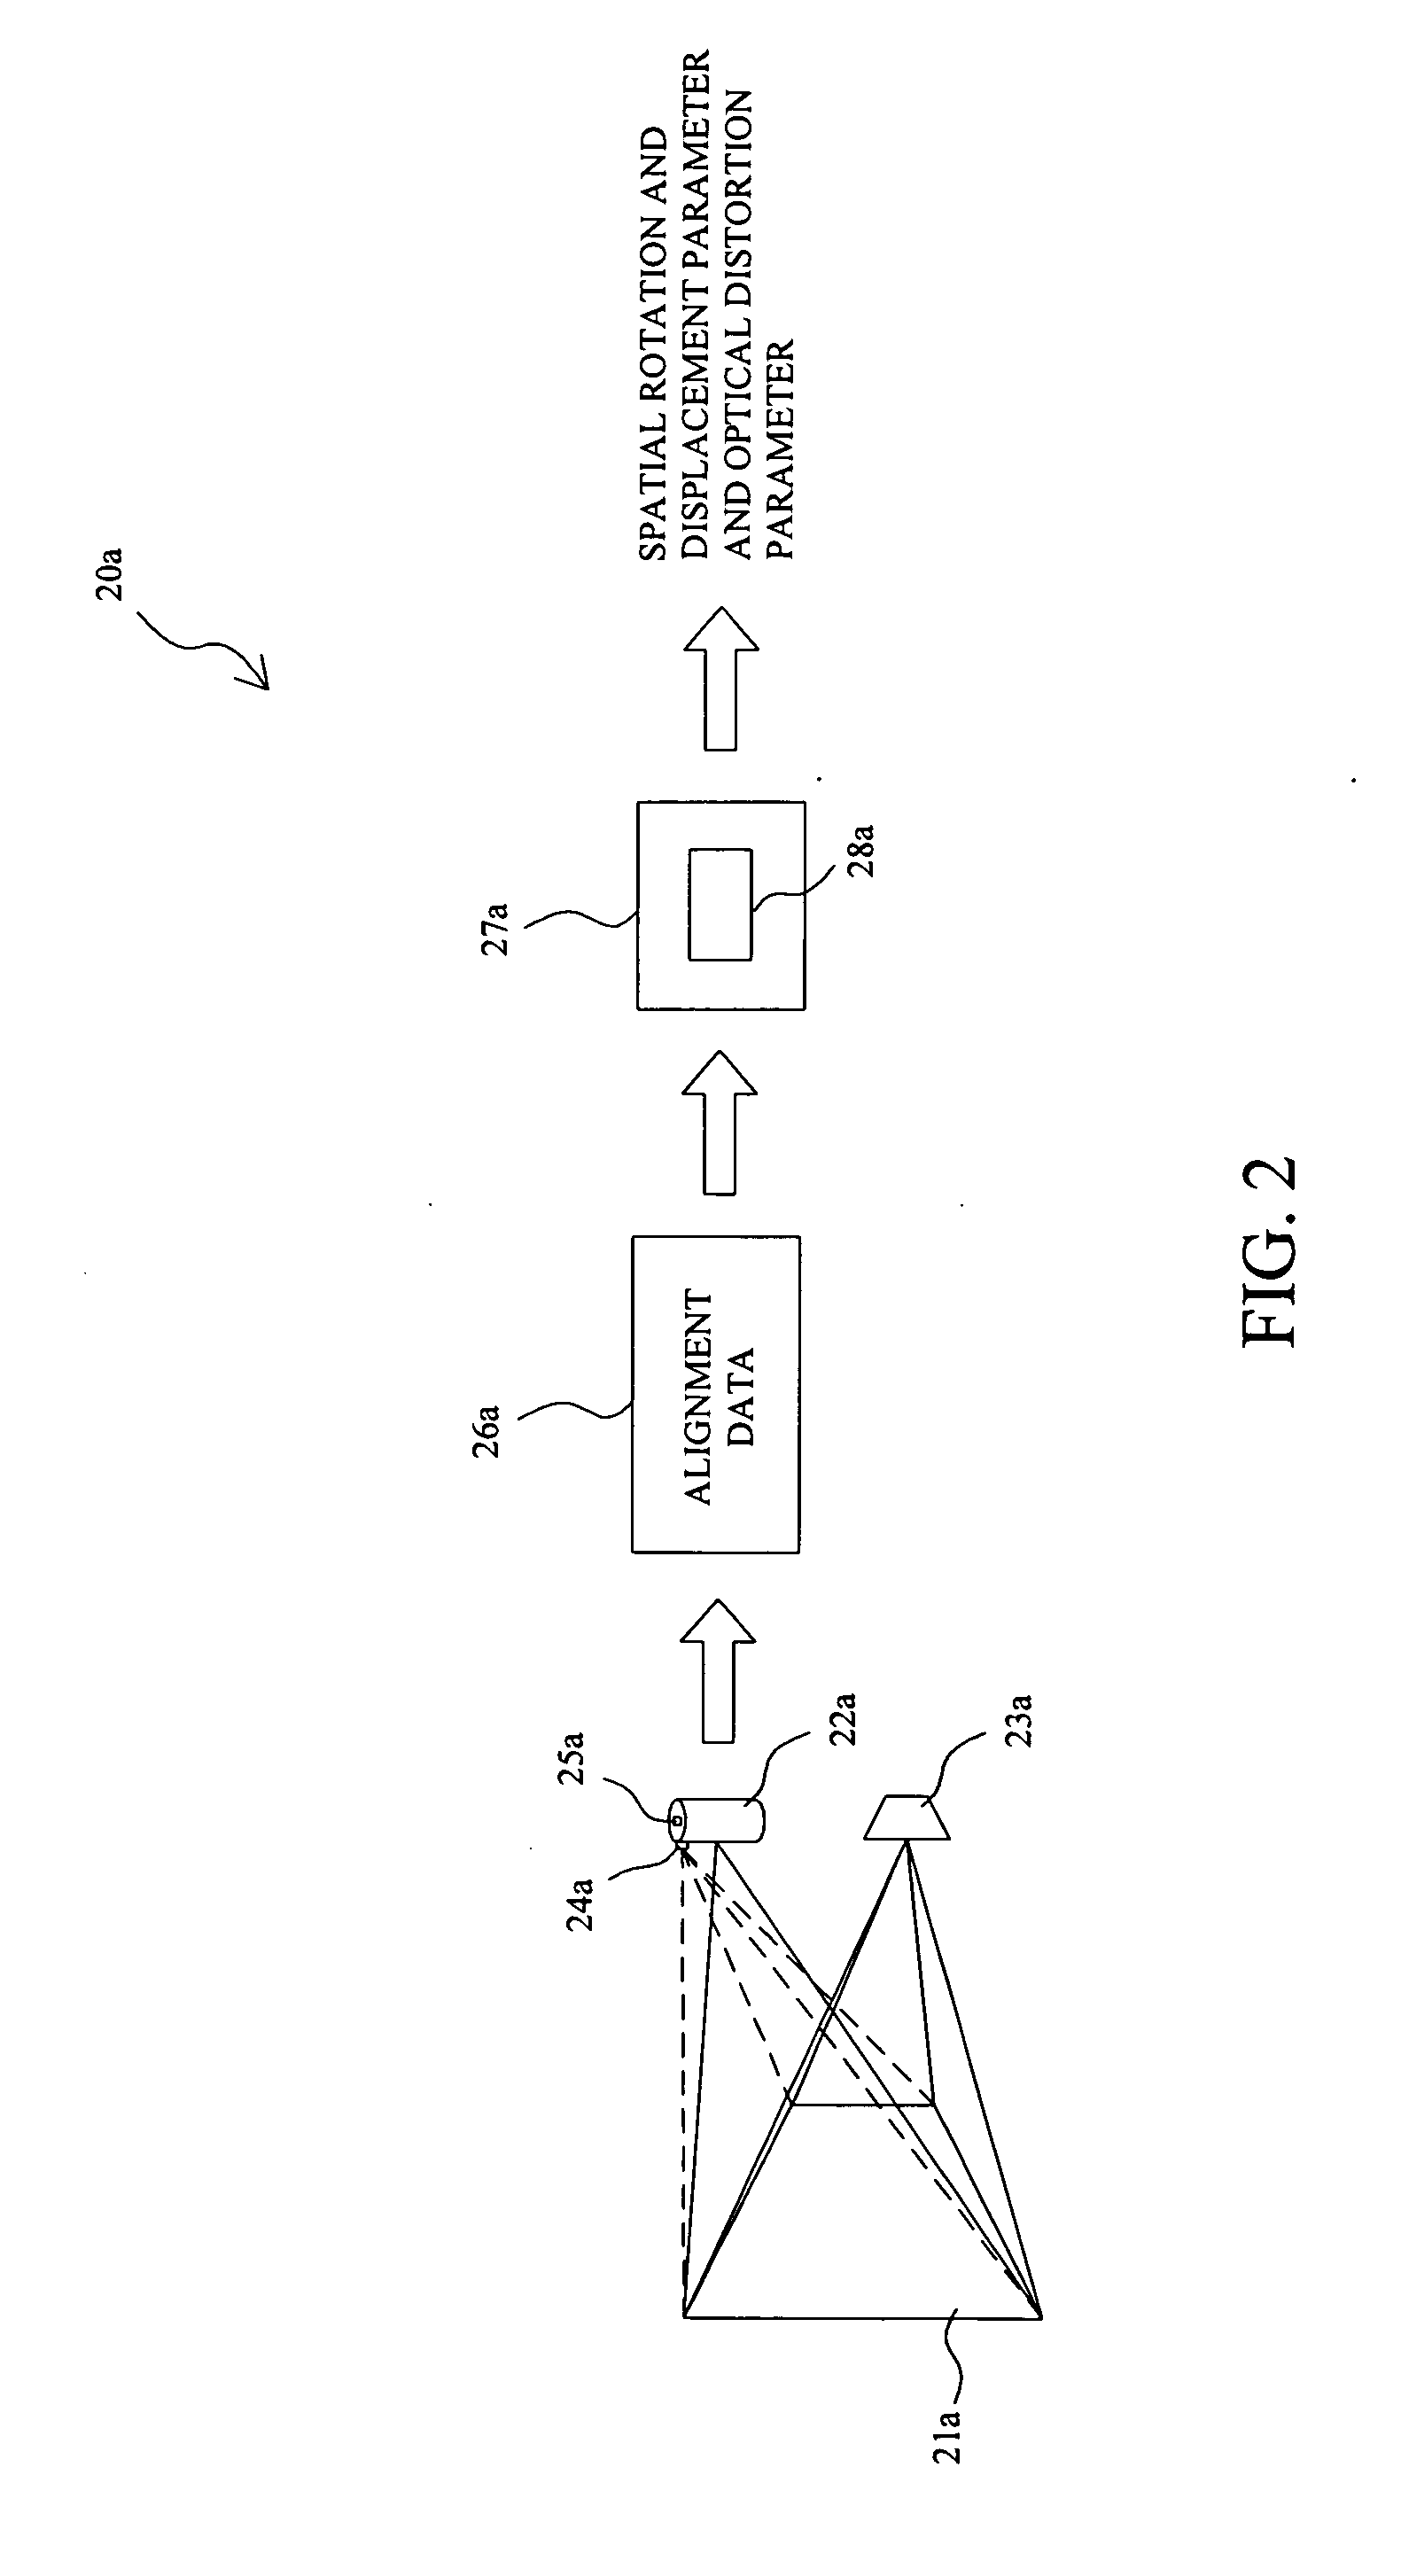 Pointing input system and method using one or more array sensors